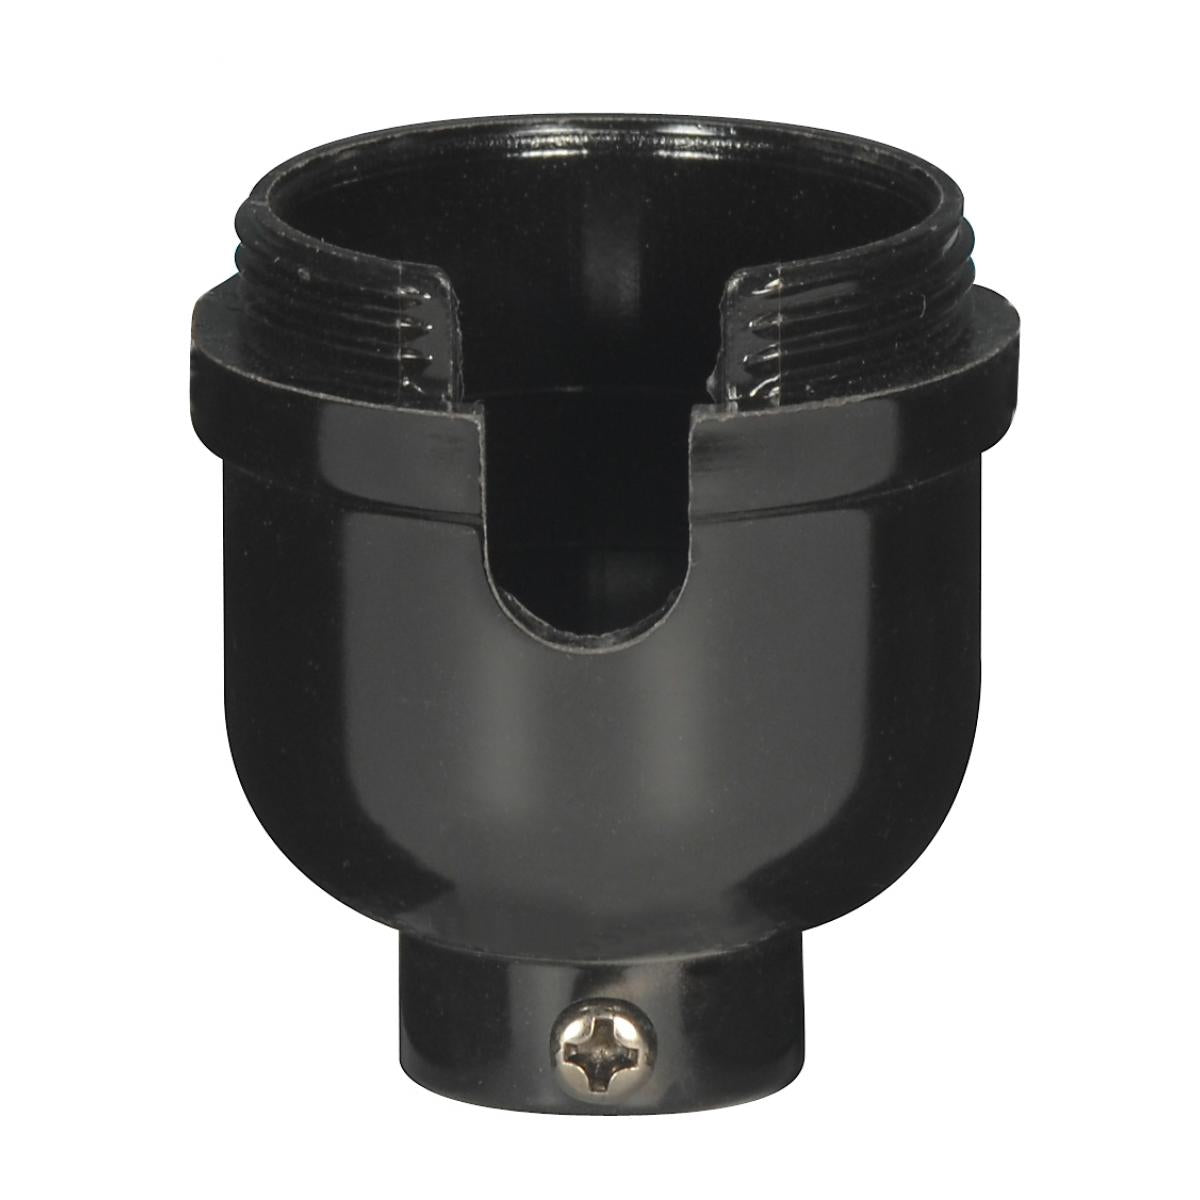 Satco 80-2135 1/8 IP Cap Only Phenolic 1/2 Uno Thread With Set Screw For Turn Knob And Pull Chain With Plastic Bushing